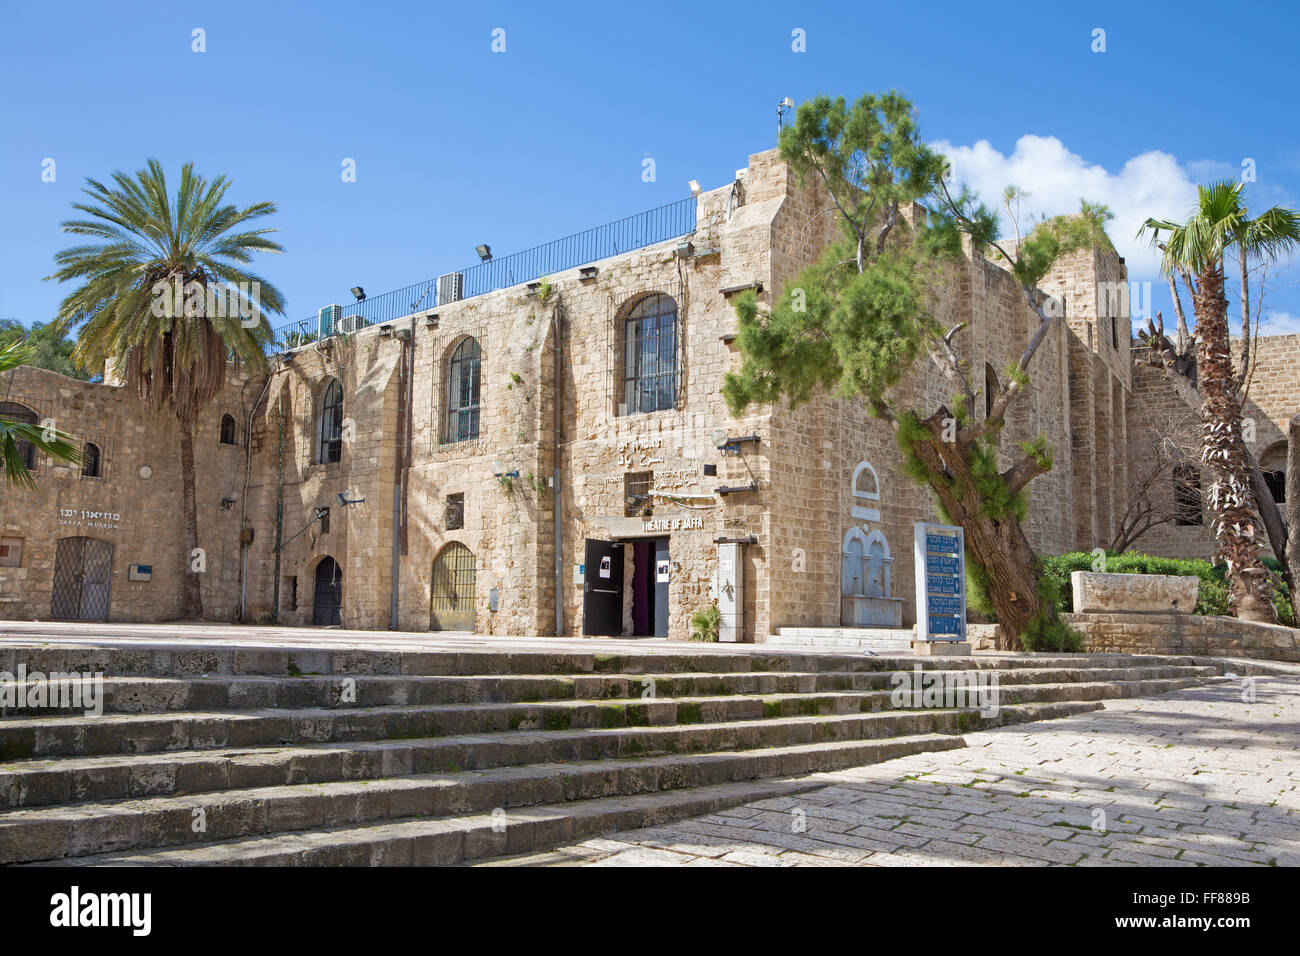 TEL AVIV, ISRAEL - MARCH 2, 2015: The theater in old Jaffa. Stock Photo